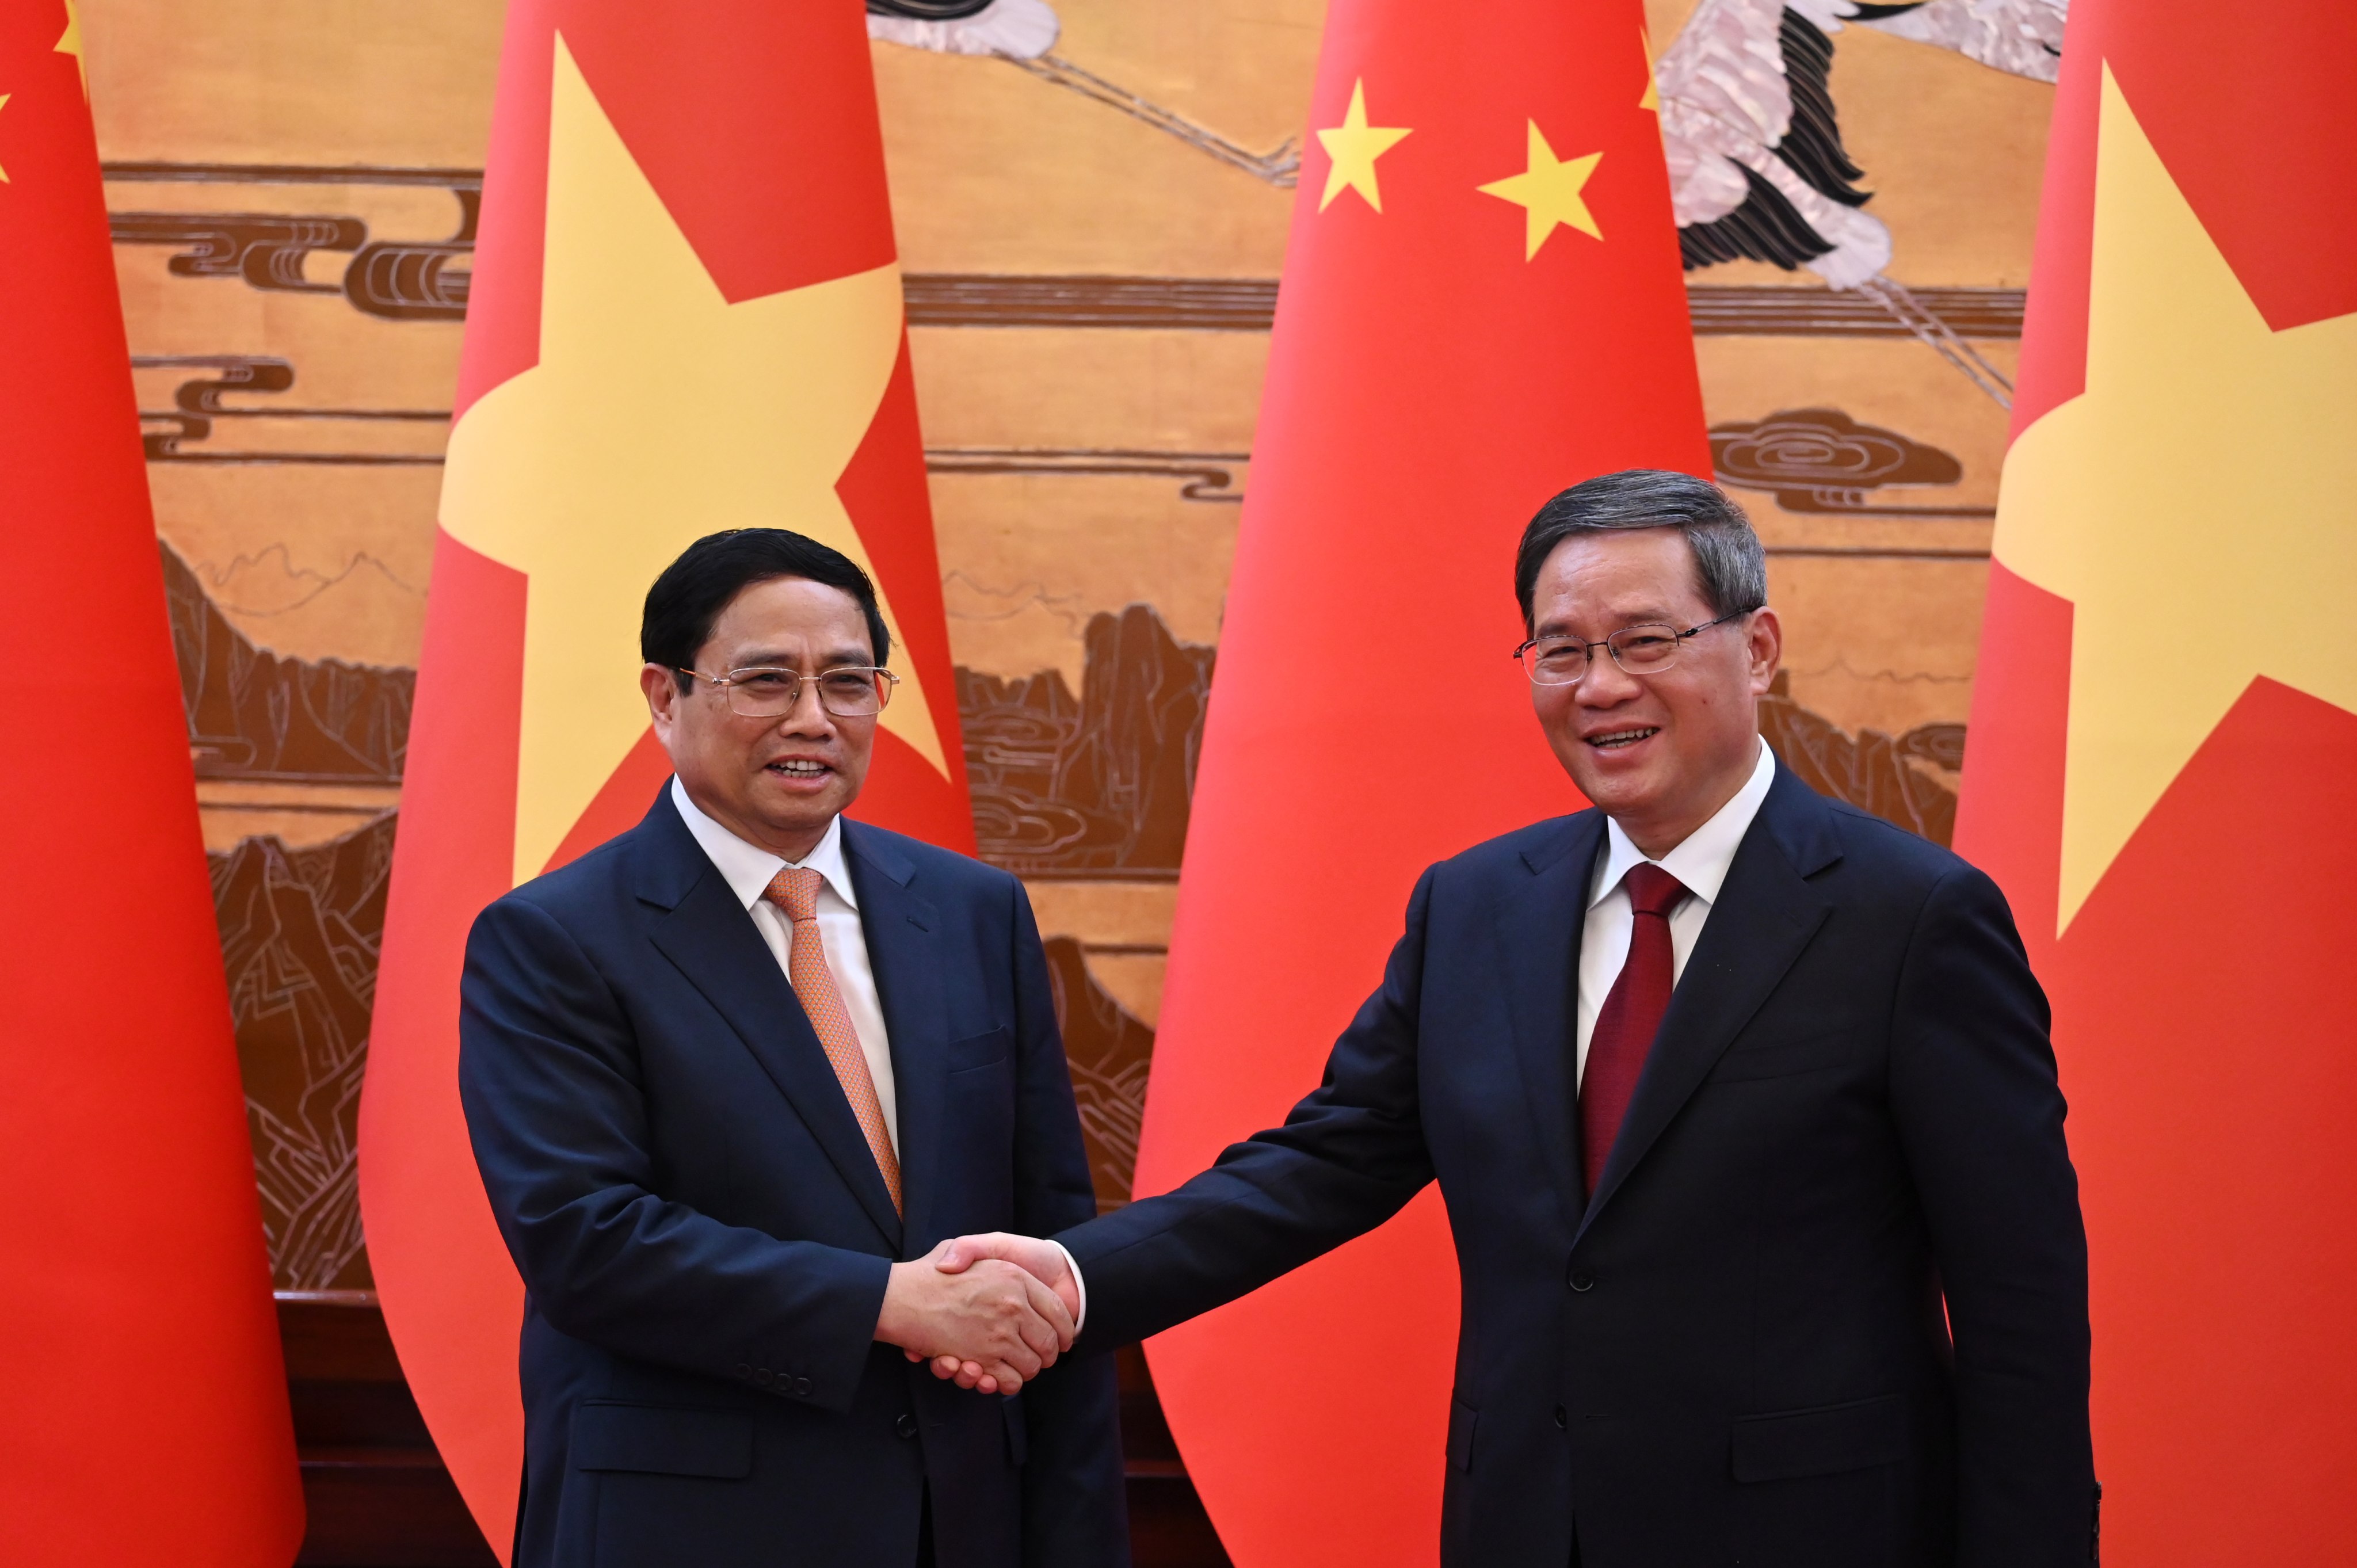 Vietnam’s Prime Minister Pham Minh Chinh (L) shakes hands with Chinese Premier Li Qiang after a signing ceremony in the Great Hall of the People in Beijing, China, 26 June 2023. Photo: EPA